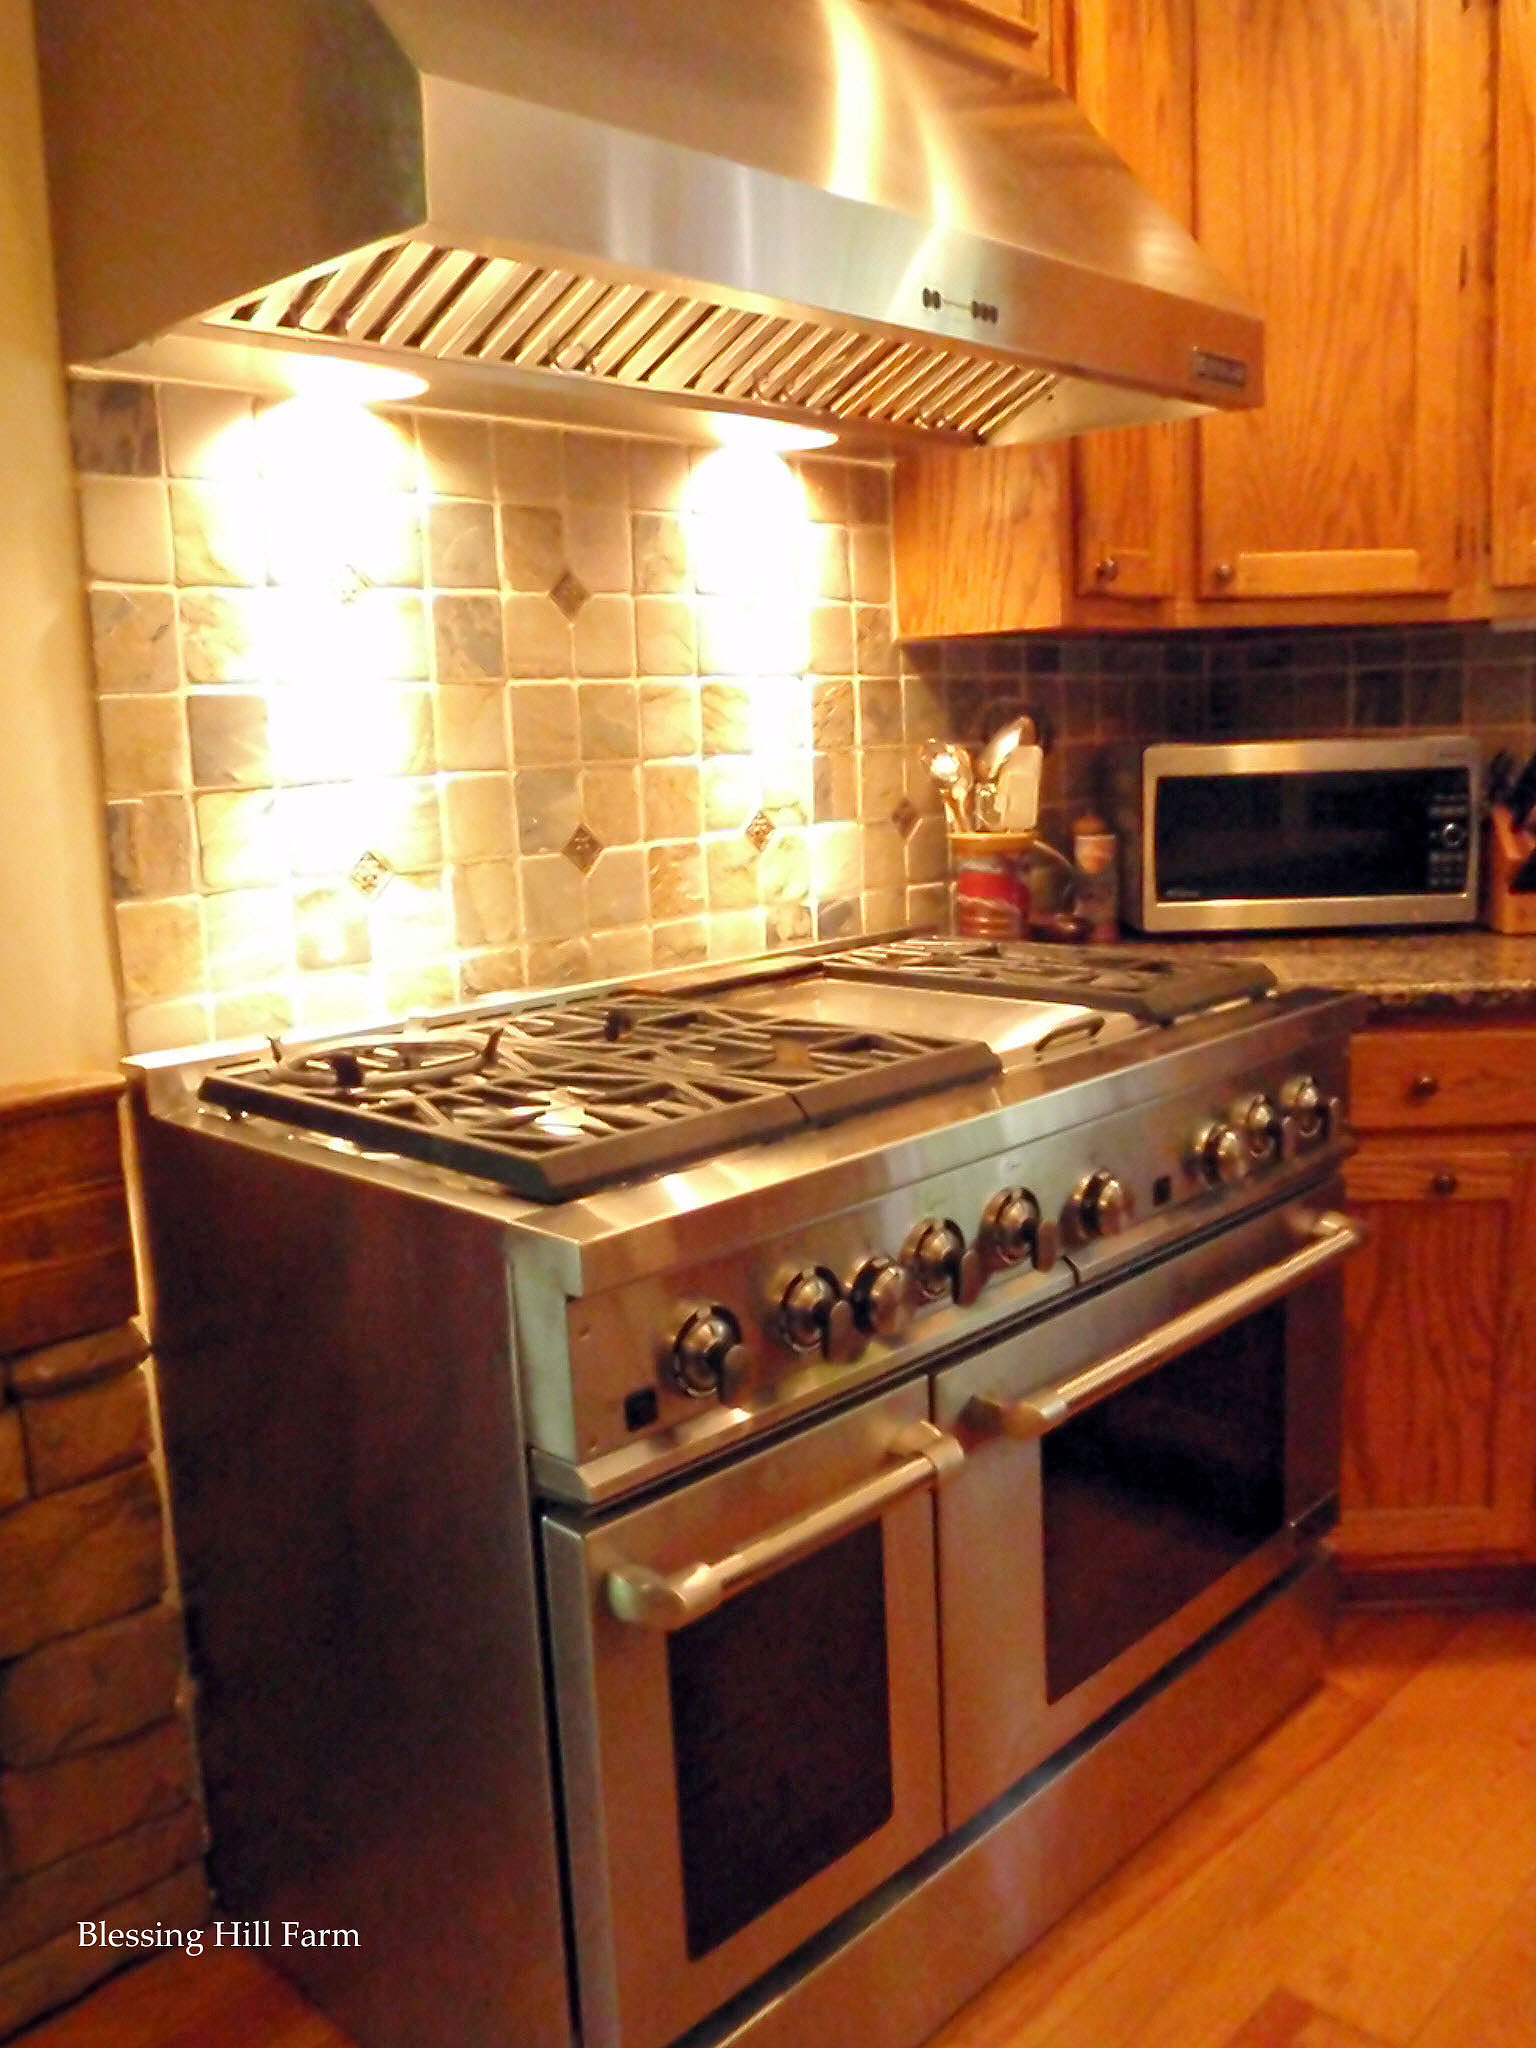 an oven and range in a kitchen with lots of wooden cabinets